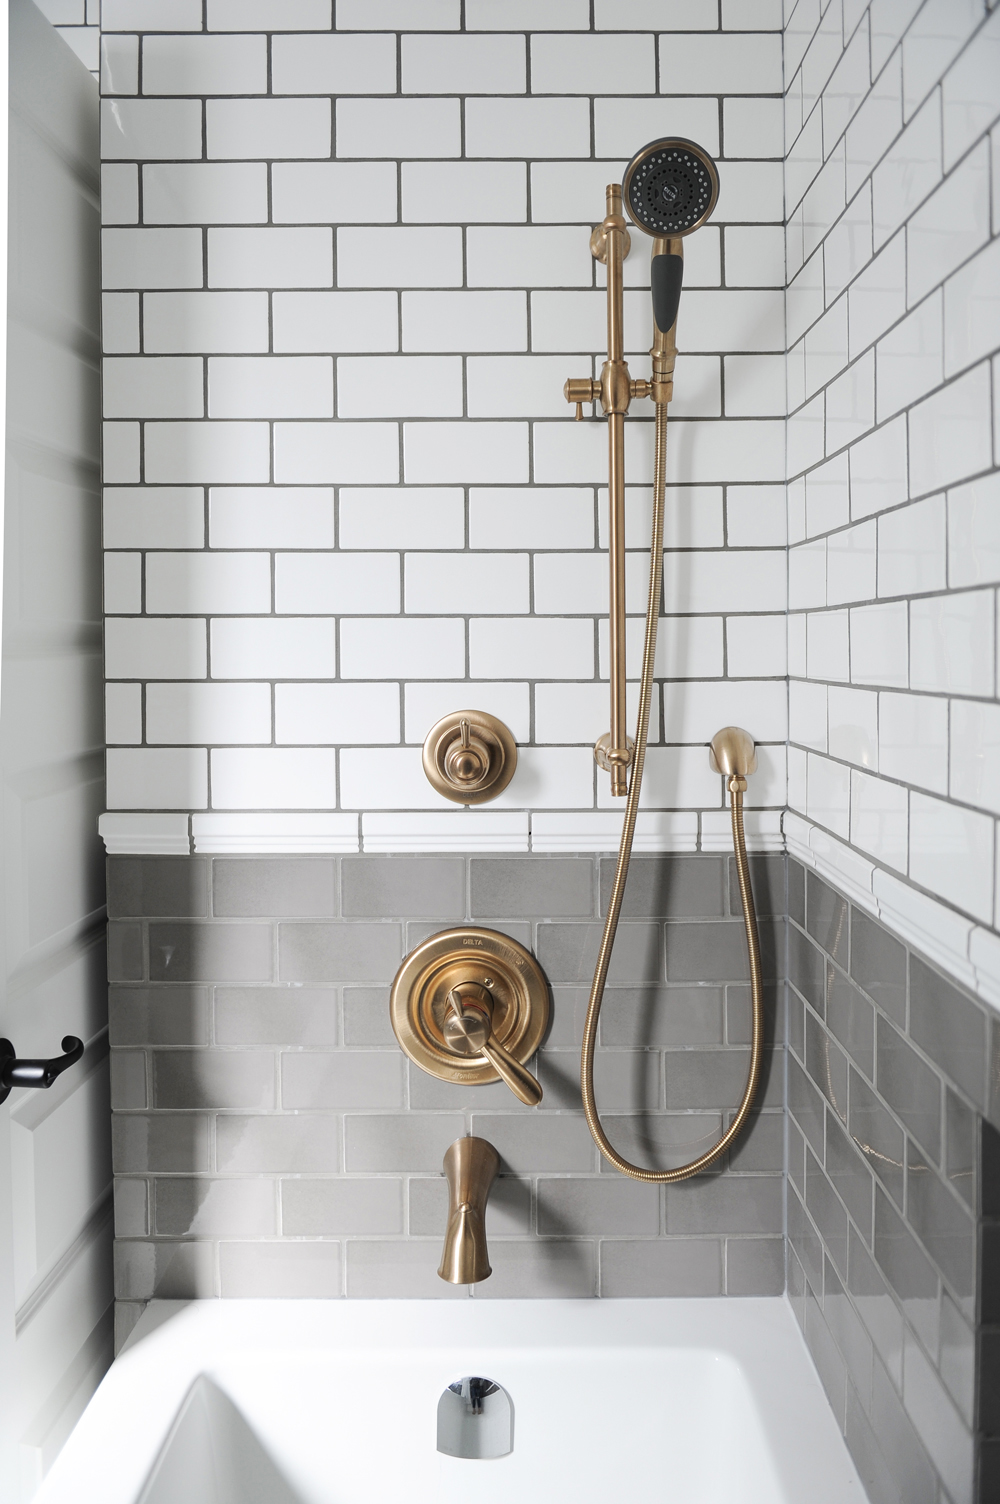 Brass exposed pipes in a renovated shower with grey and white tiles